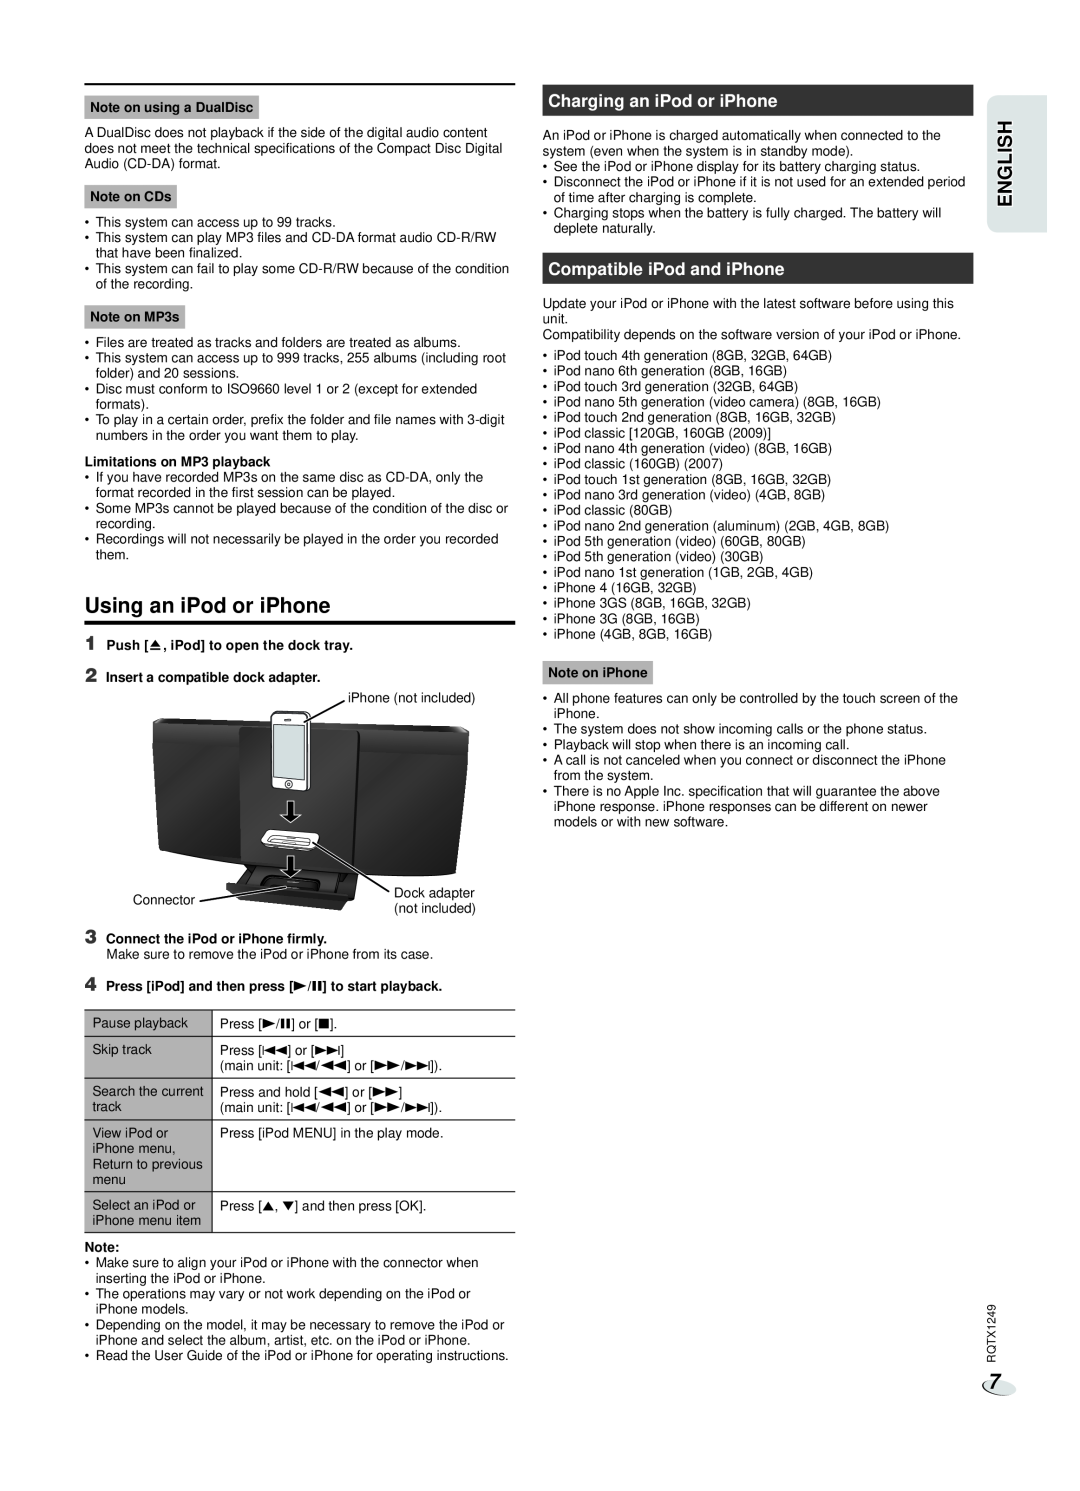 Panasonic SC-HC25 owner manual Using an iPod or iPhone, Charging an iPod or iPhone, Compatible iPod and iPhone, English 